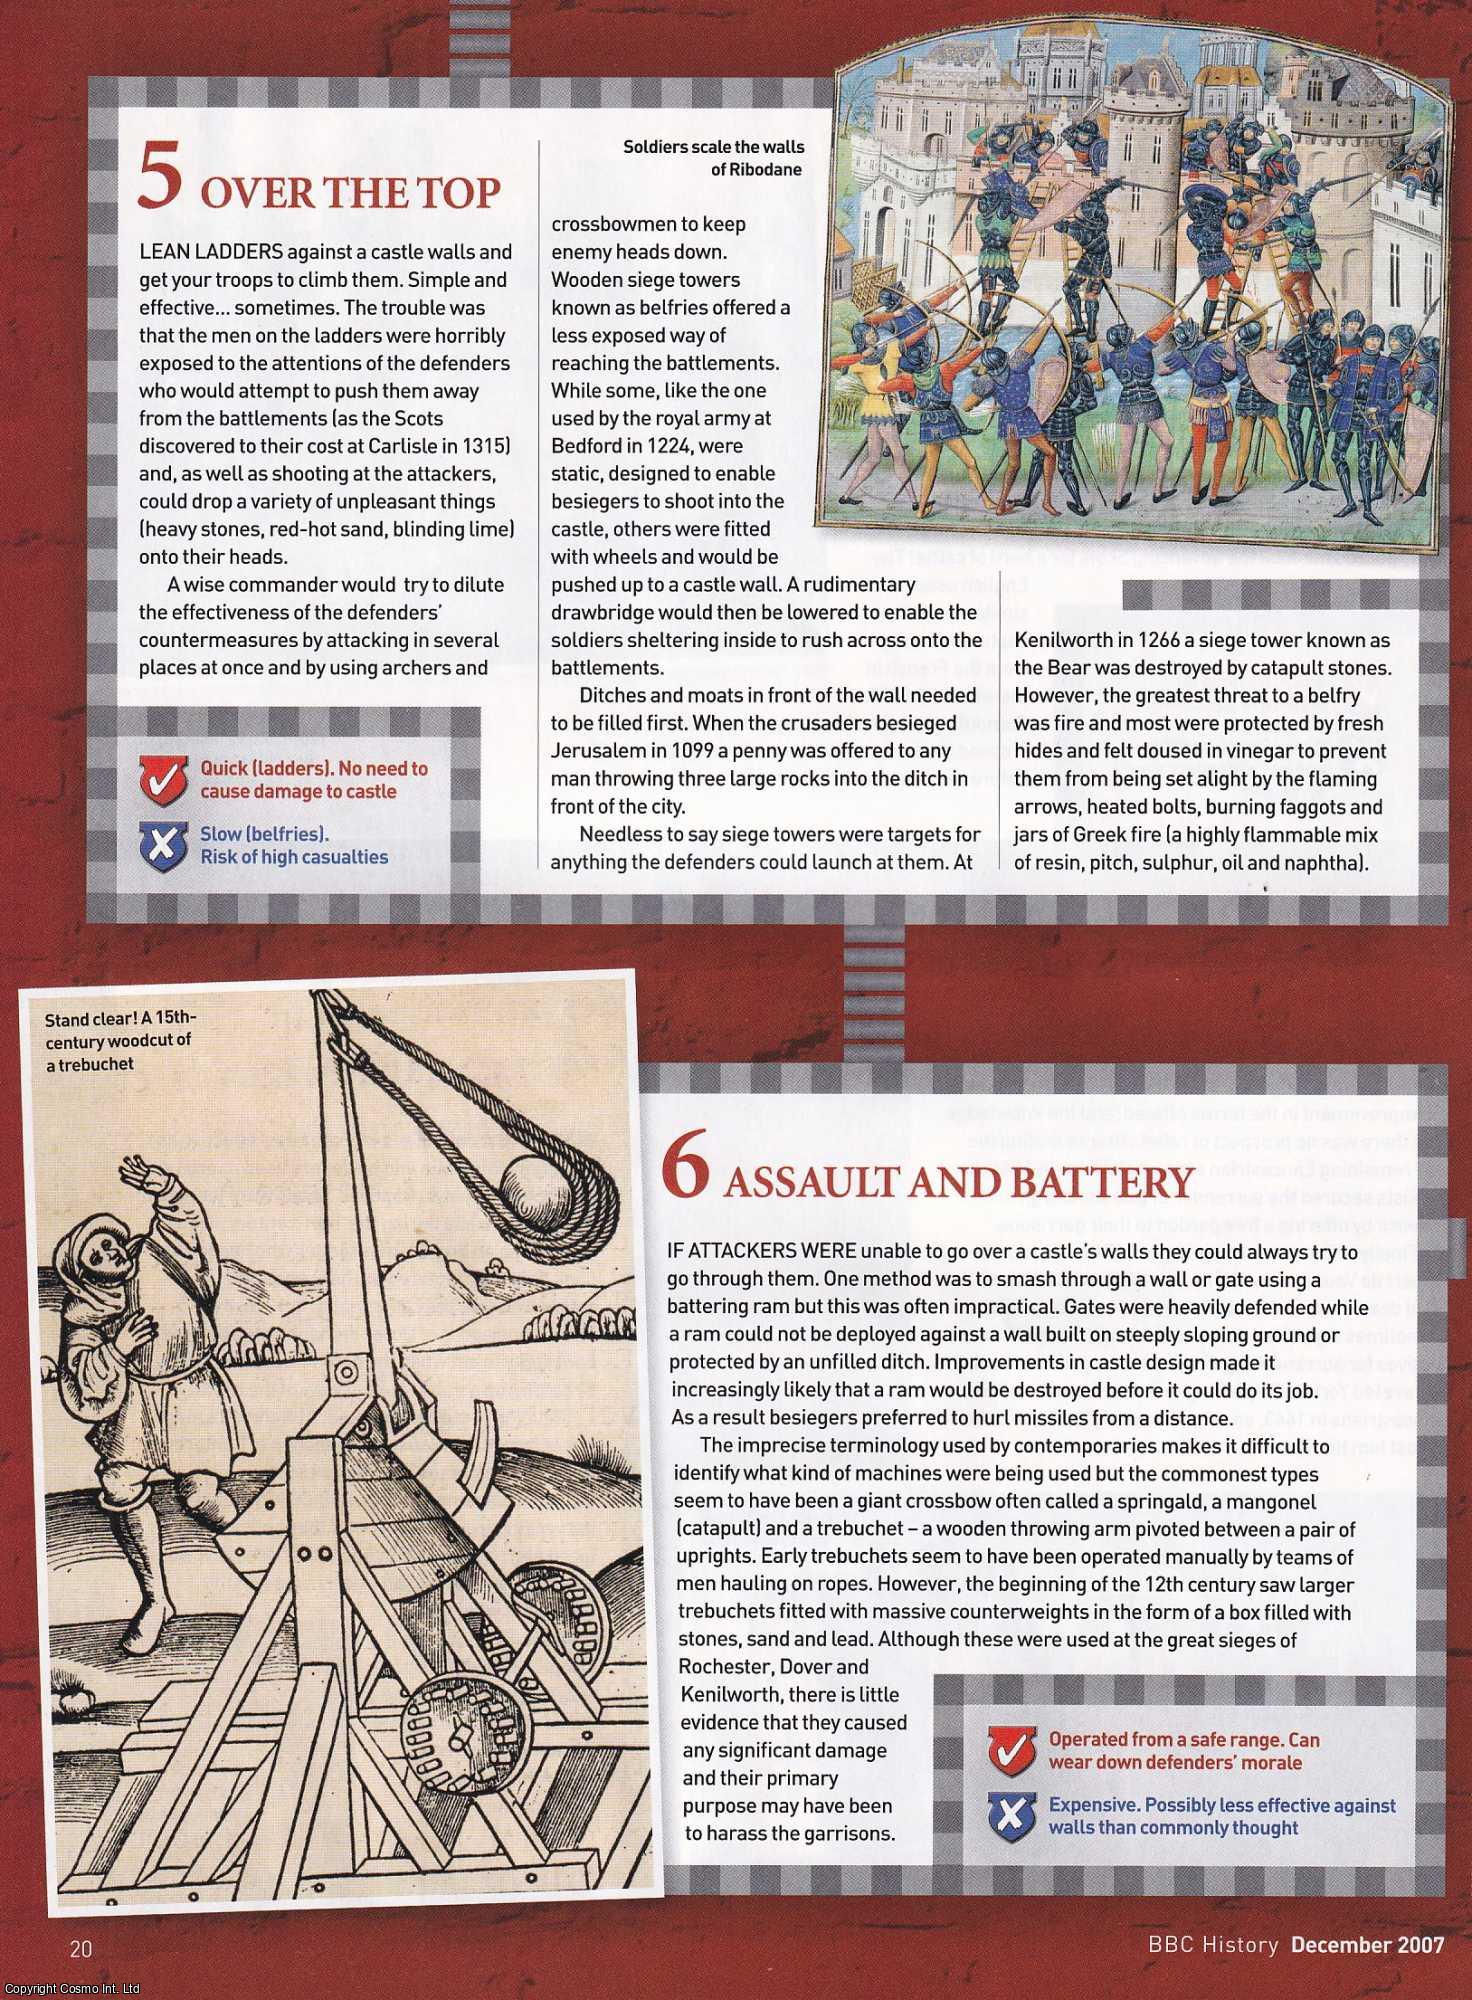 Julian Humphrys - How to Capture a Castle; Ten Methods for Seizing a Stronghold. An original article from BBC History Magazine, 2007.